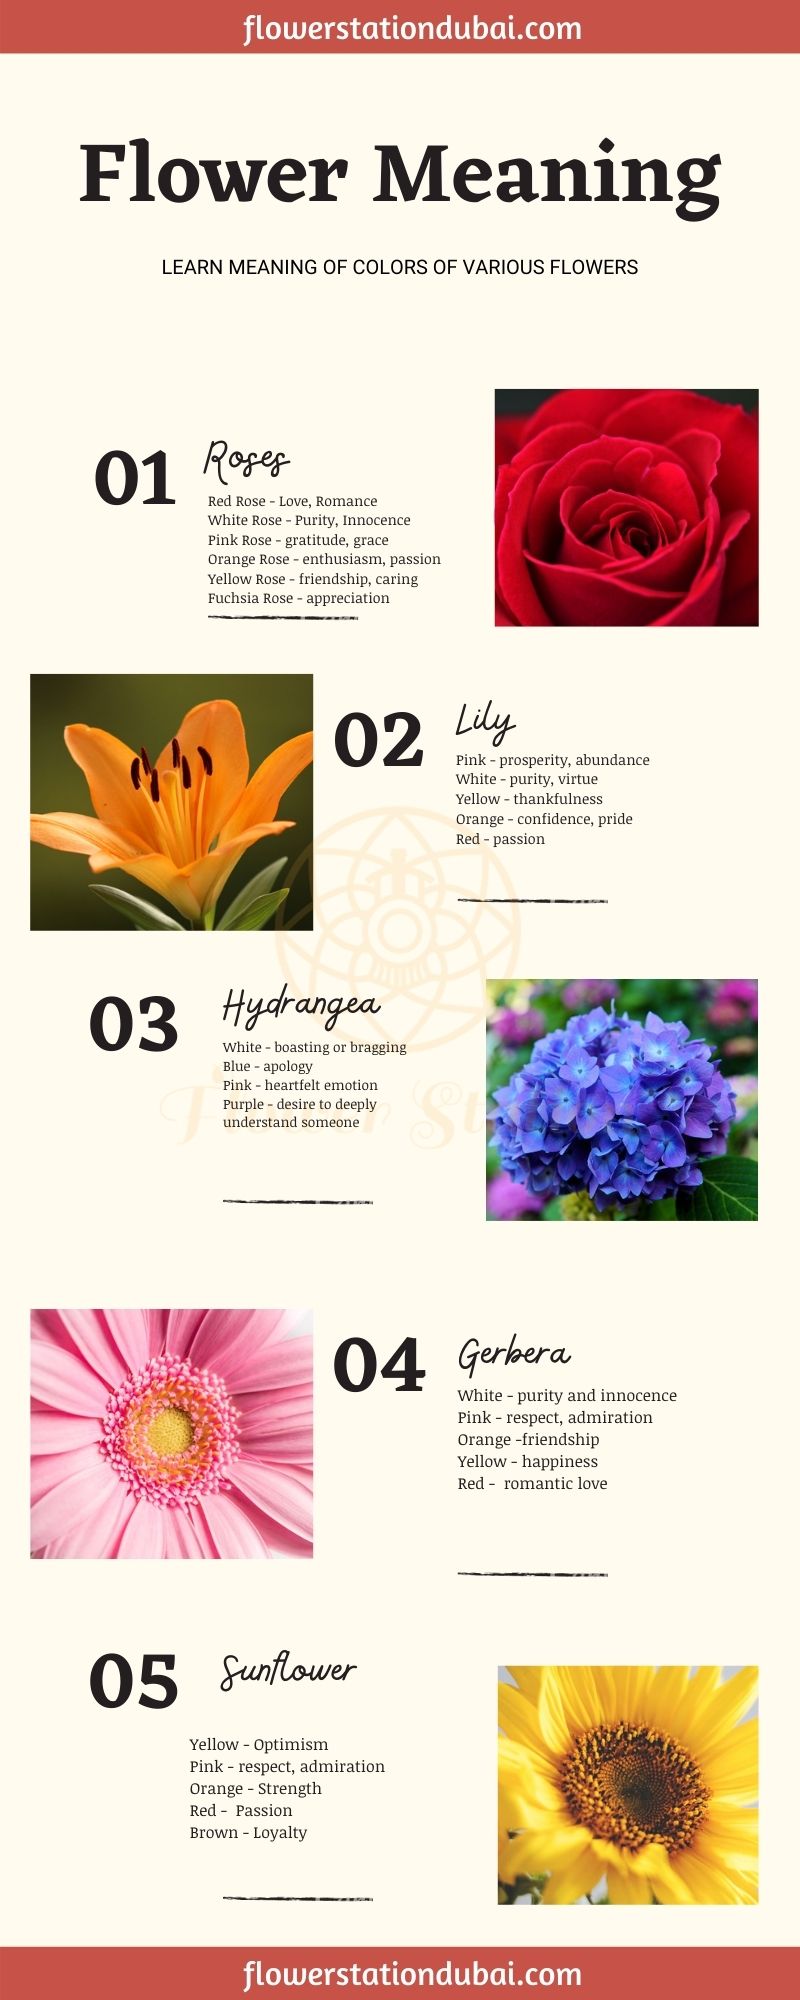 meaning of flower colors